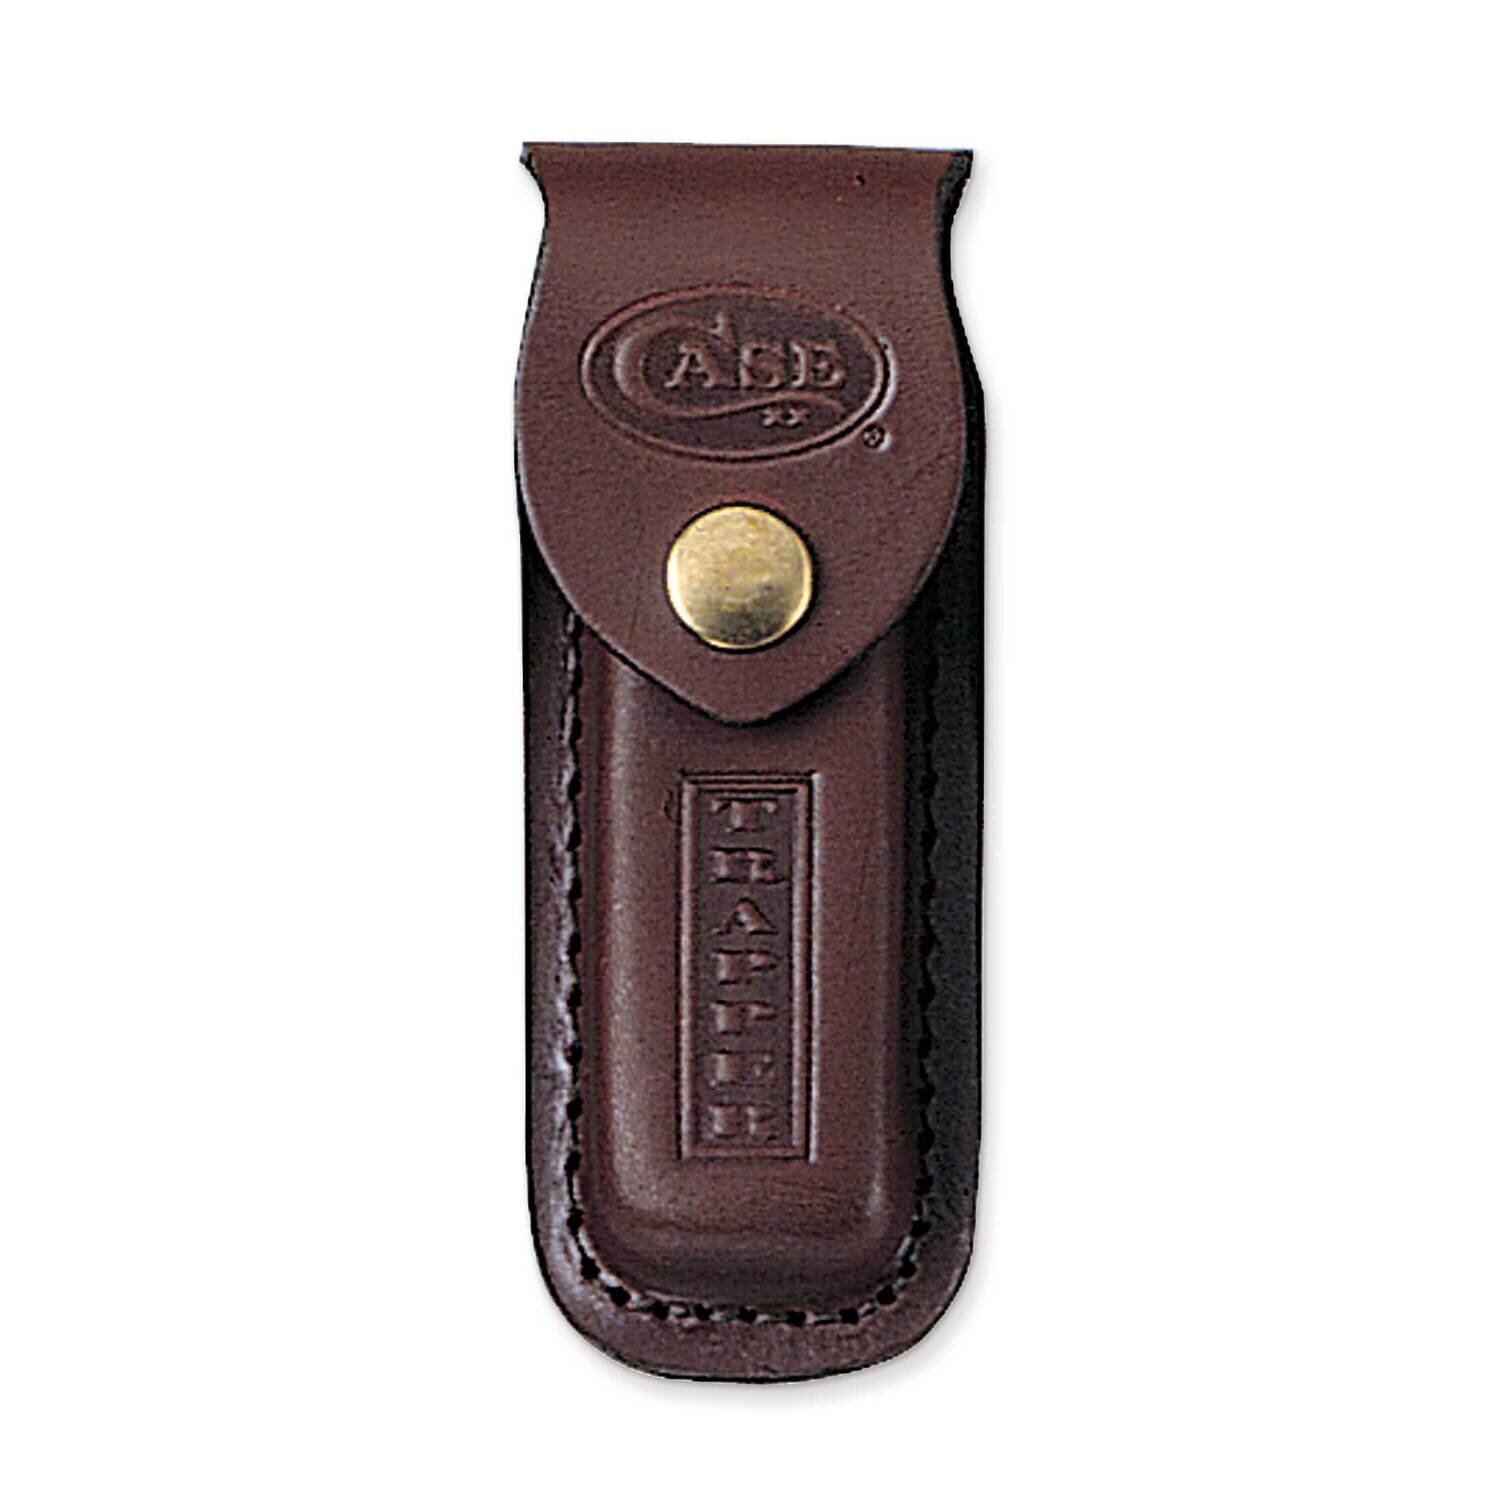 Case Genuine Leather with Stamped Logo Trapper Knife Sheath GM13758